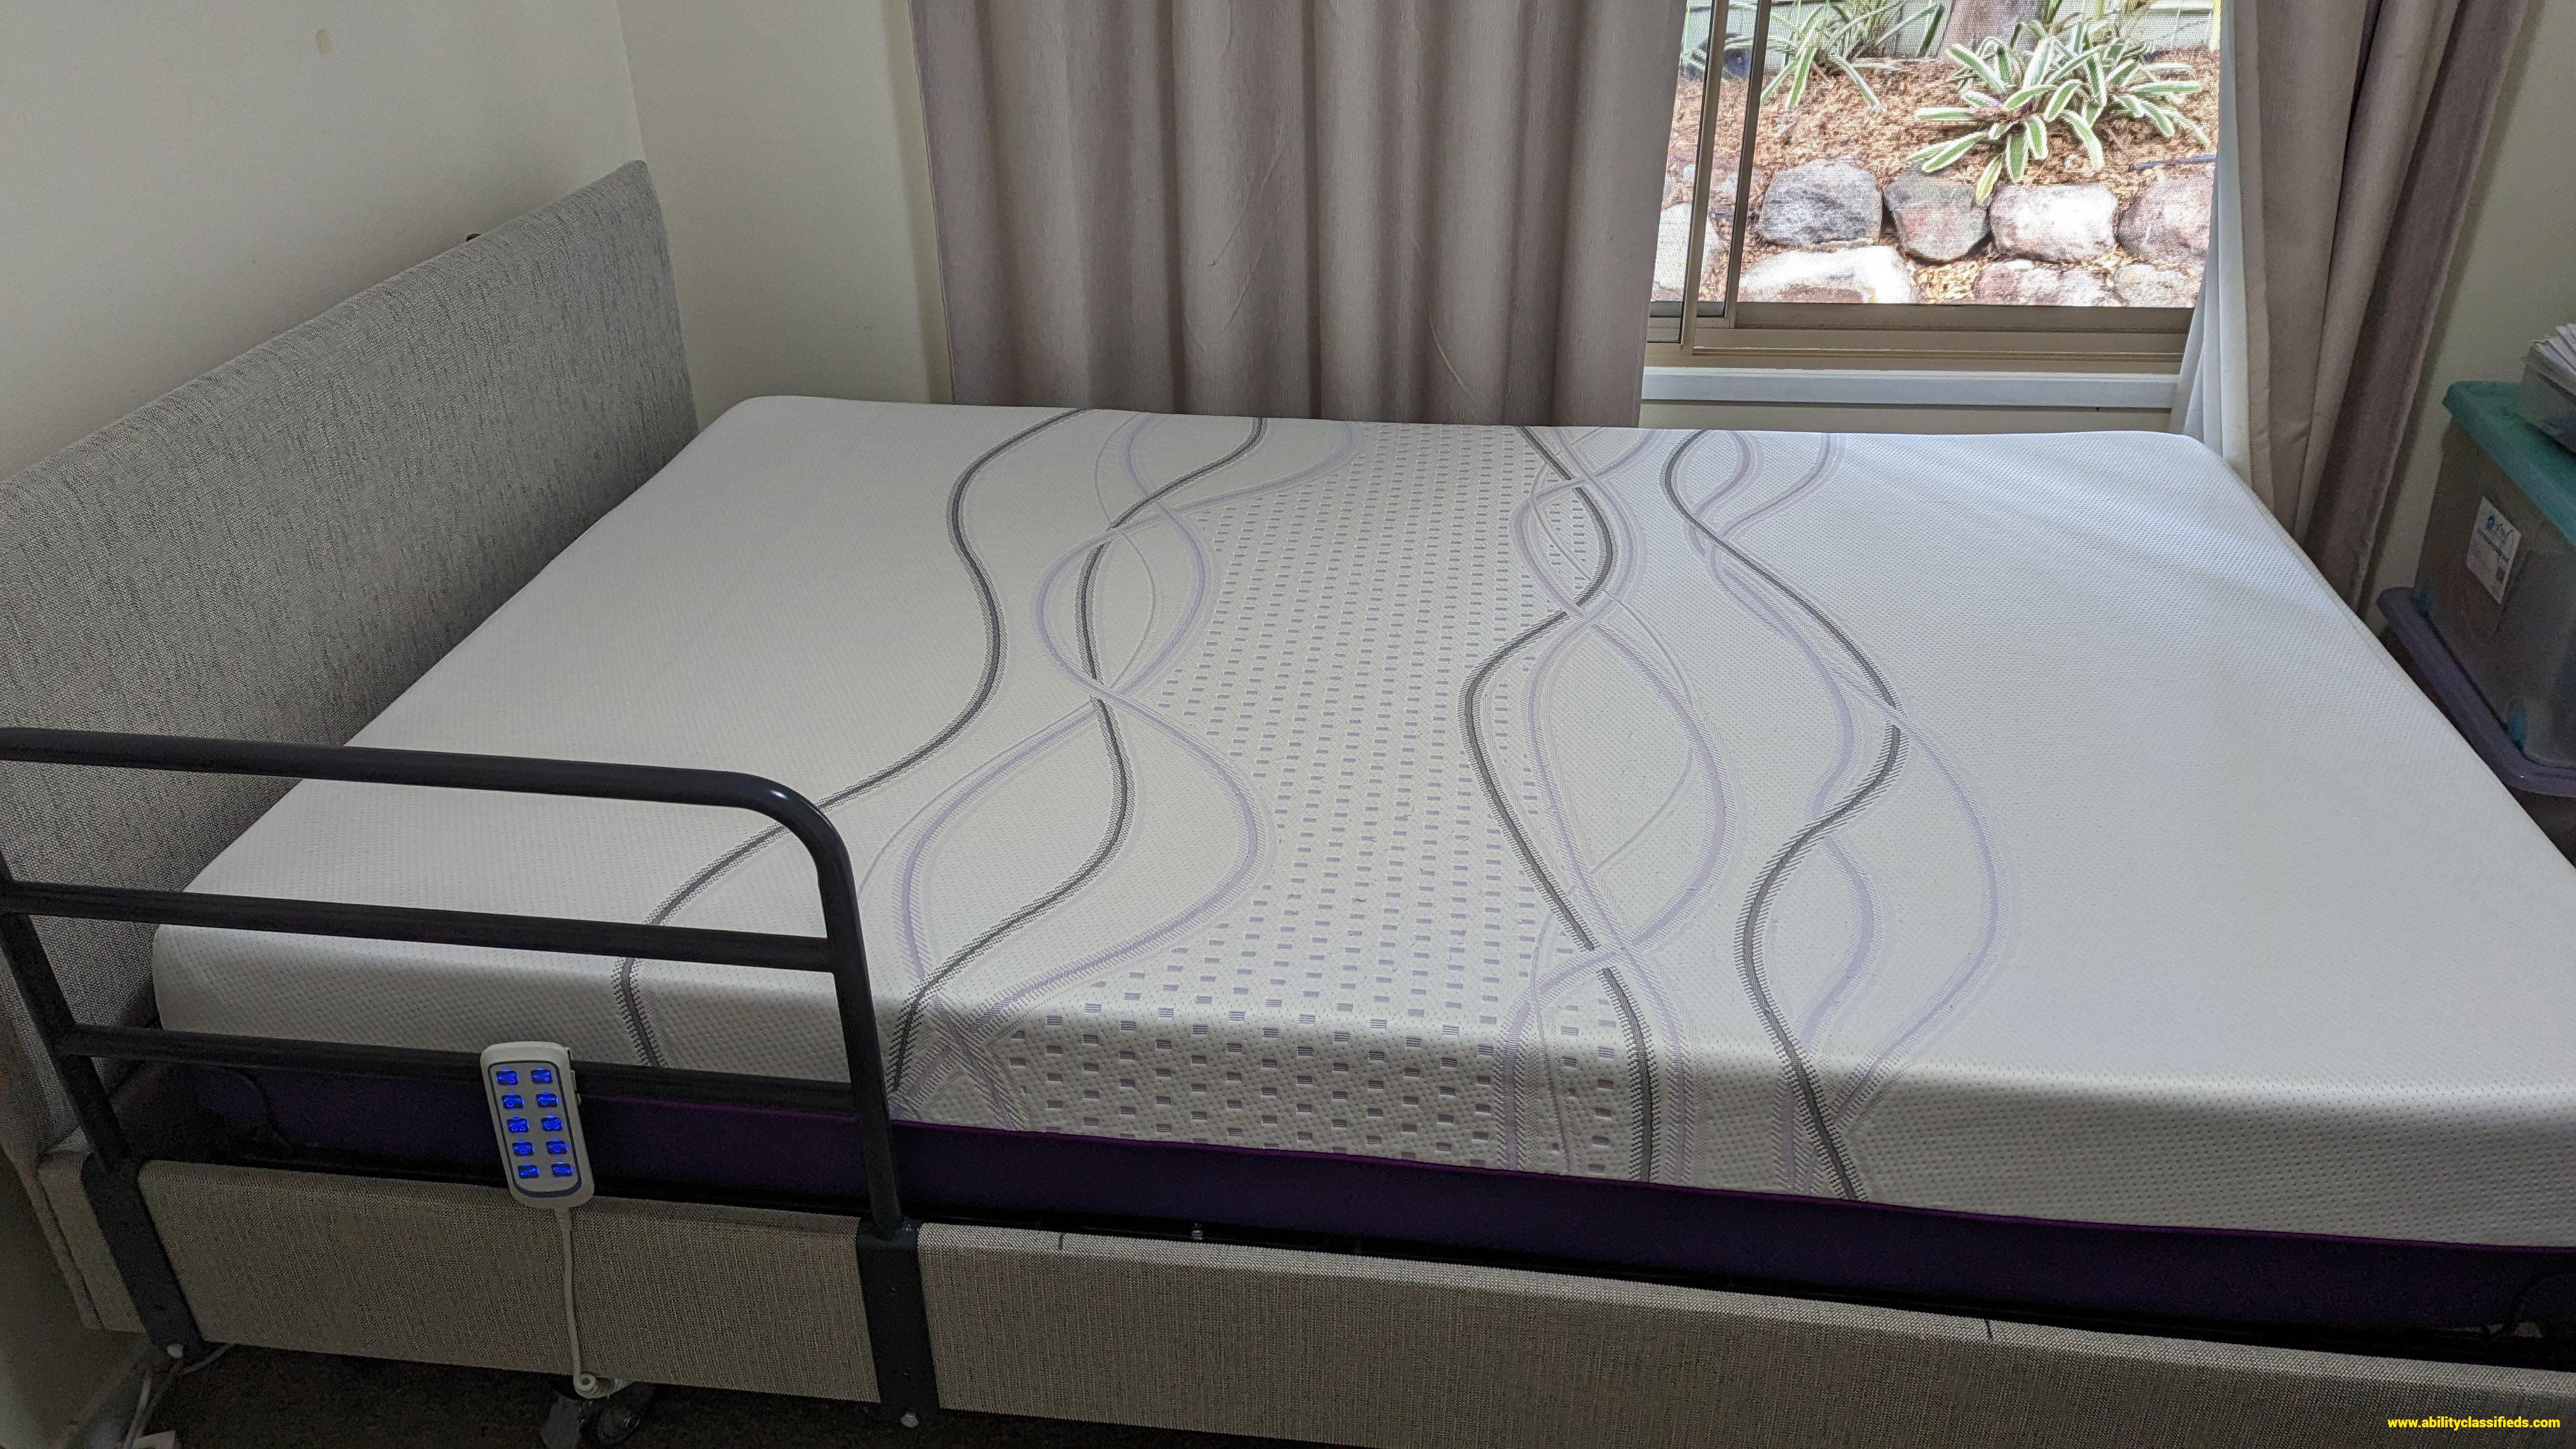 I Care IC333 Double bed & Mattress